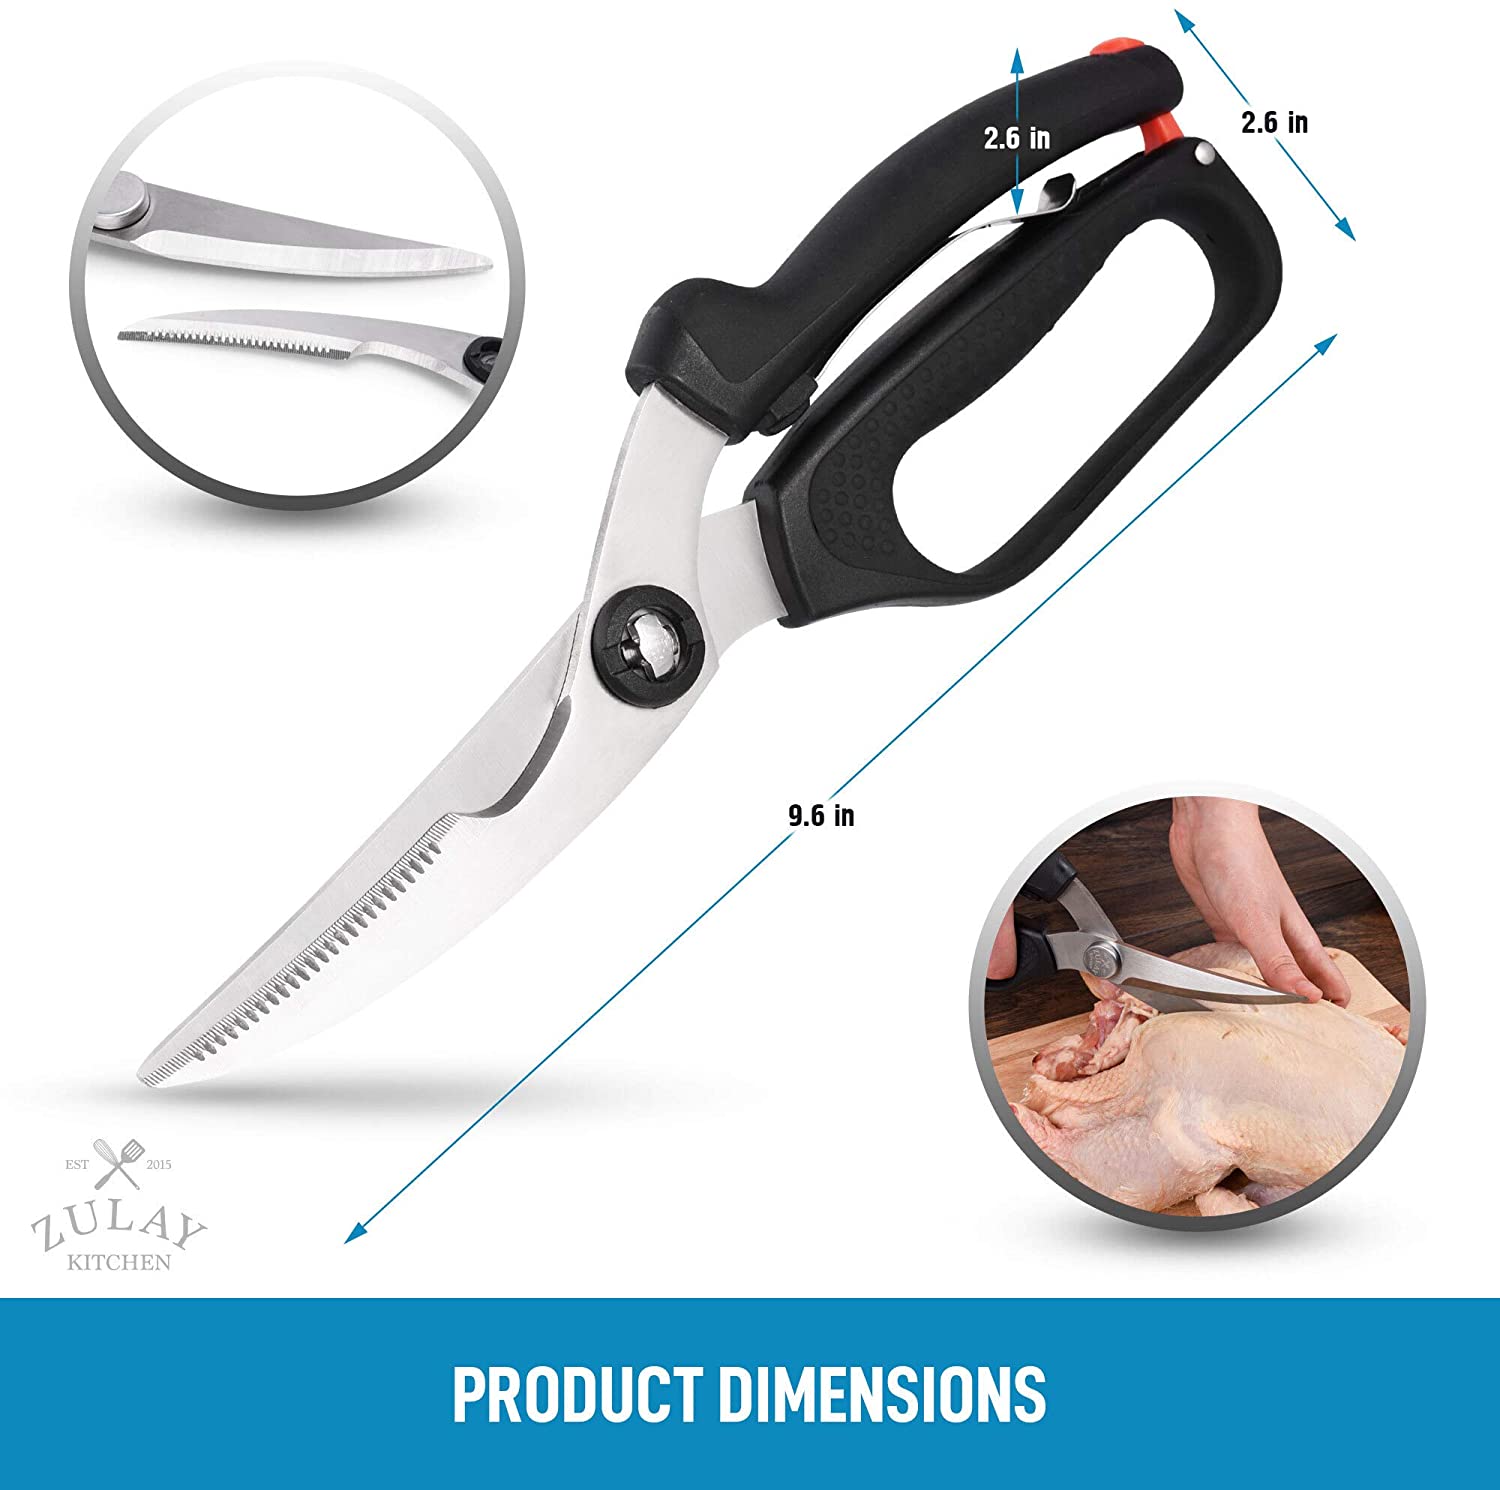 Heavy Duty Poultry Shears - Kitchen Scissors for Cutting Chicken, Poultry,  Game, Meat - Chopping Vegetable 